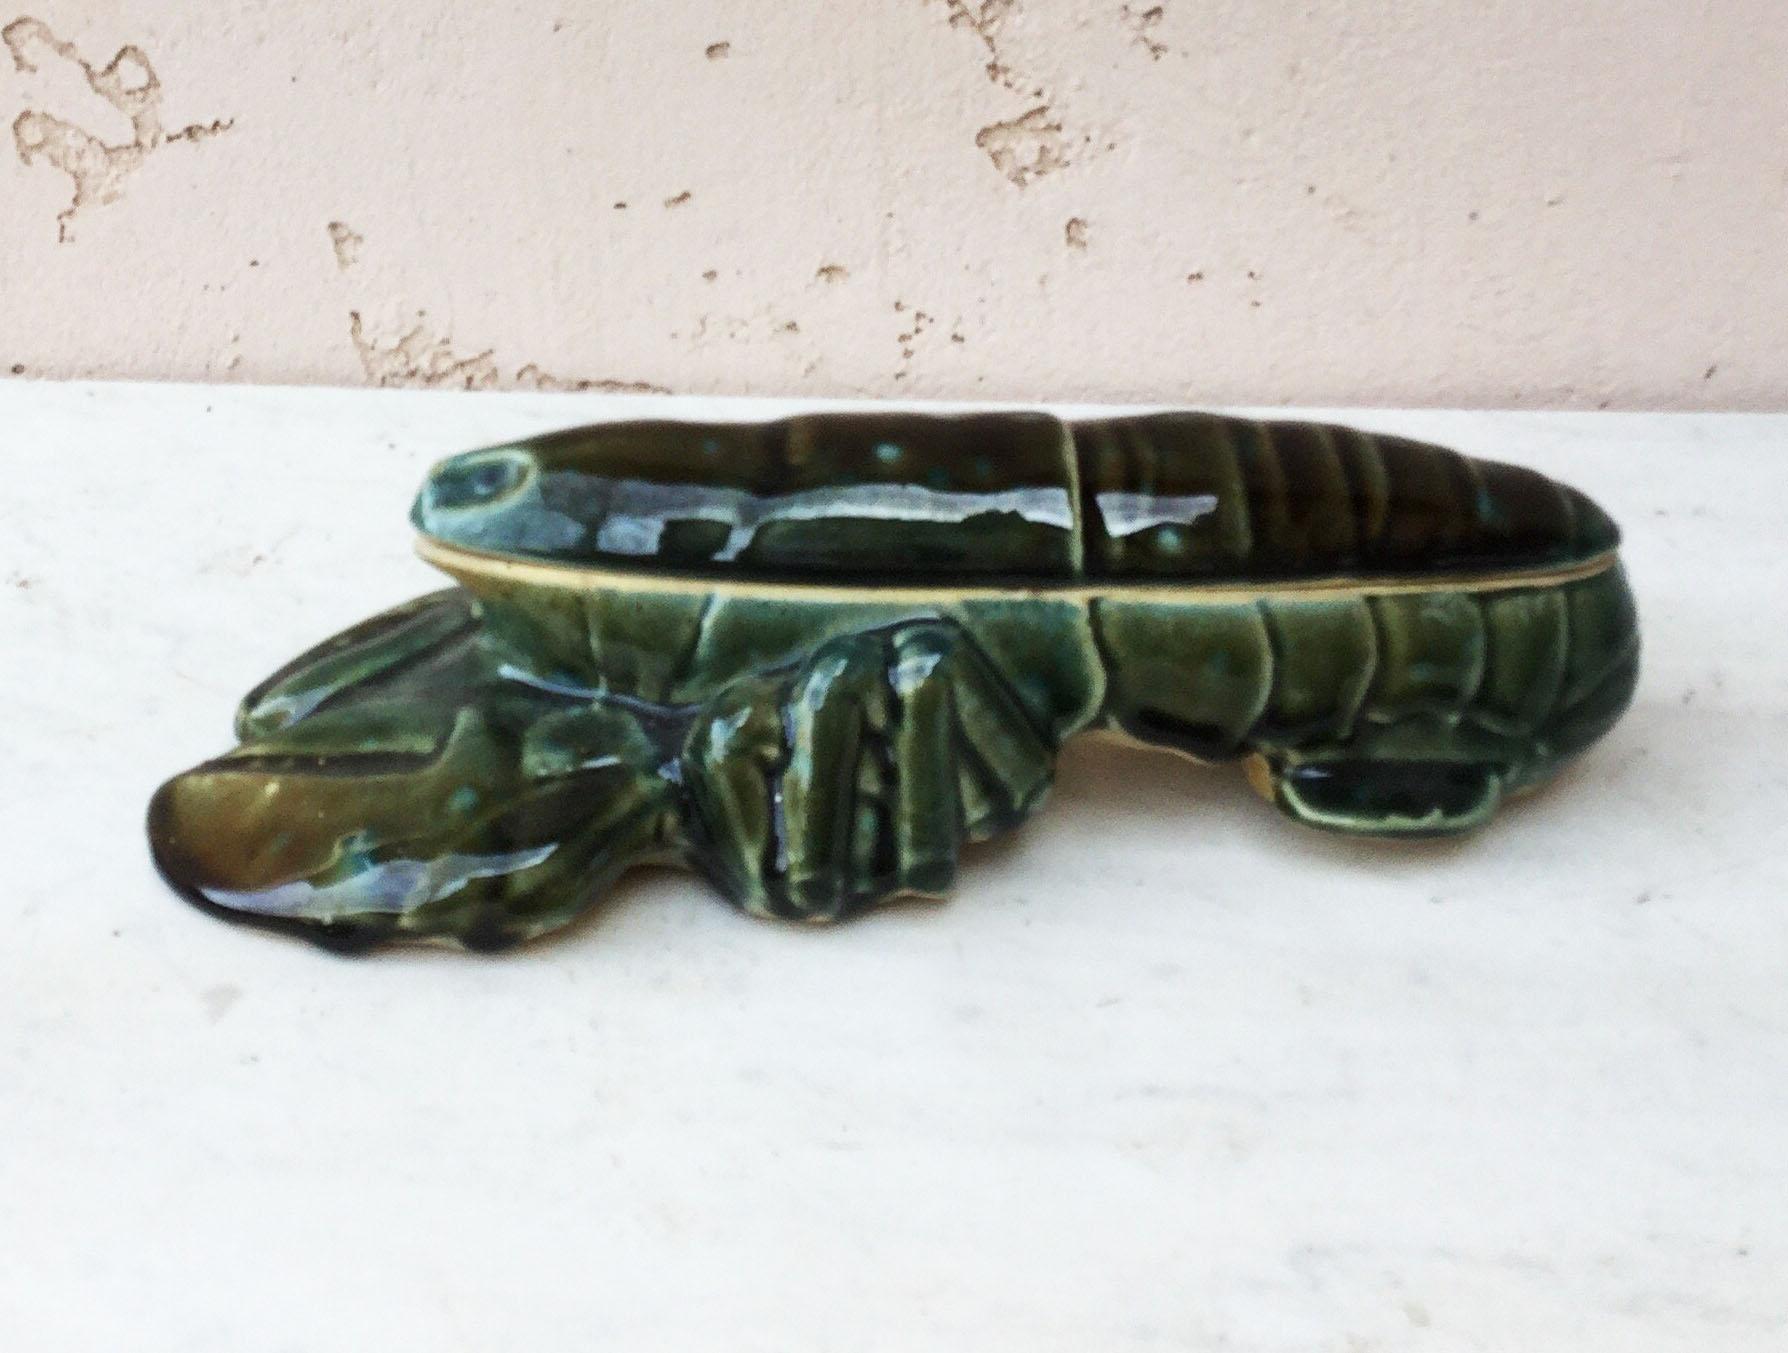 Large French Majolica lobster tureen or box with green glaze, circa 1950.